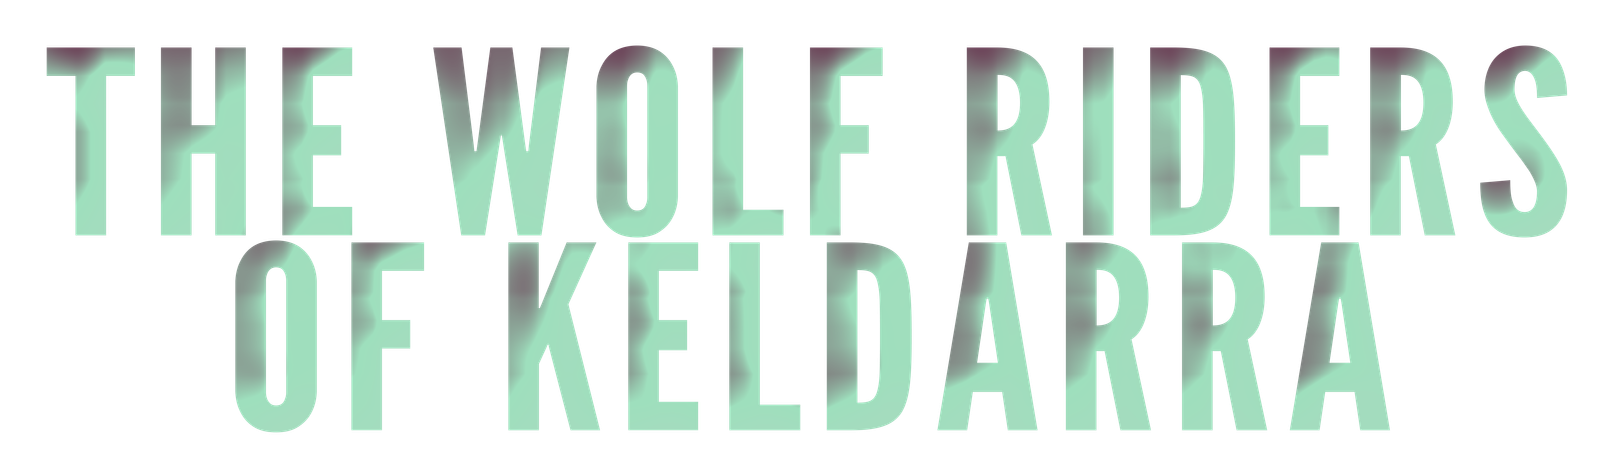 Logo of the Book Series "The Wolf Riders of Keldarra" by Author Nathalie M.L. Römer